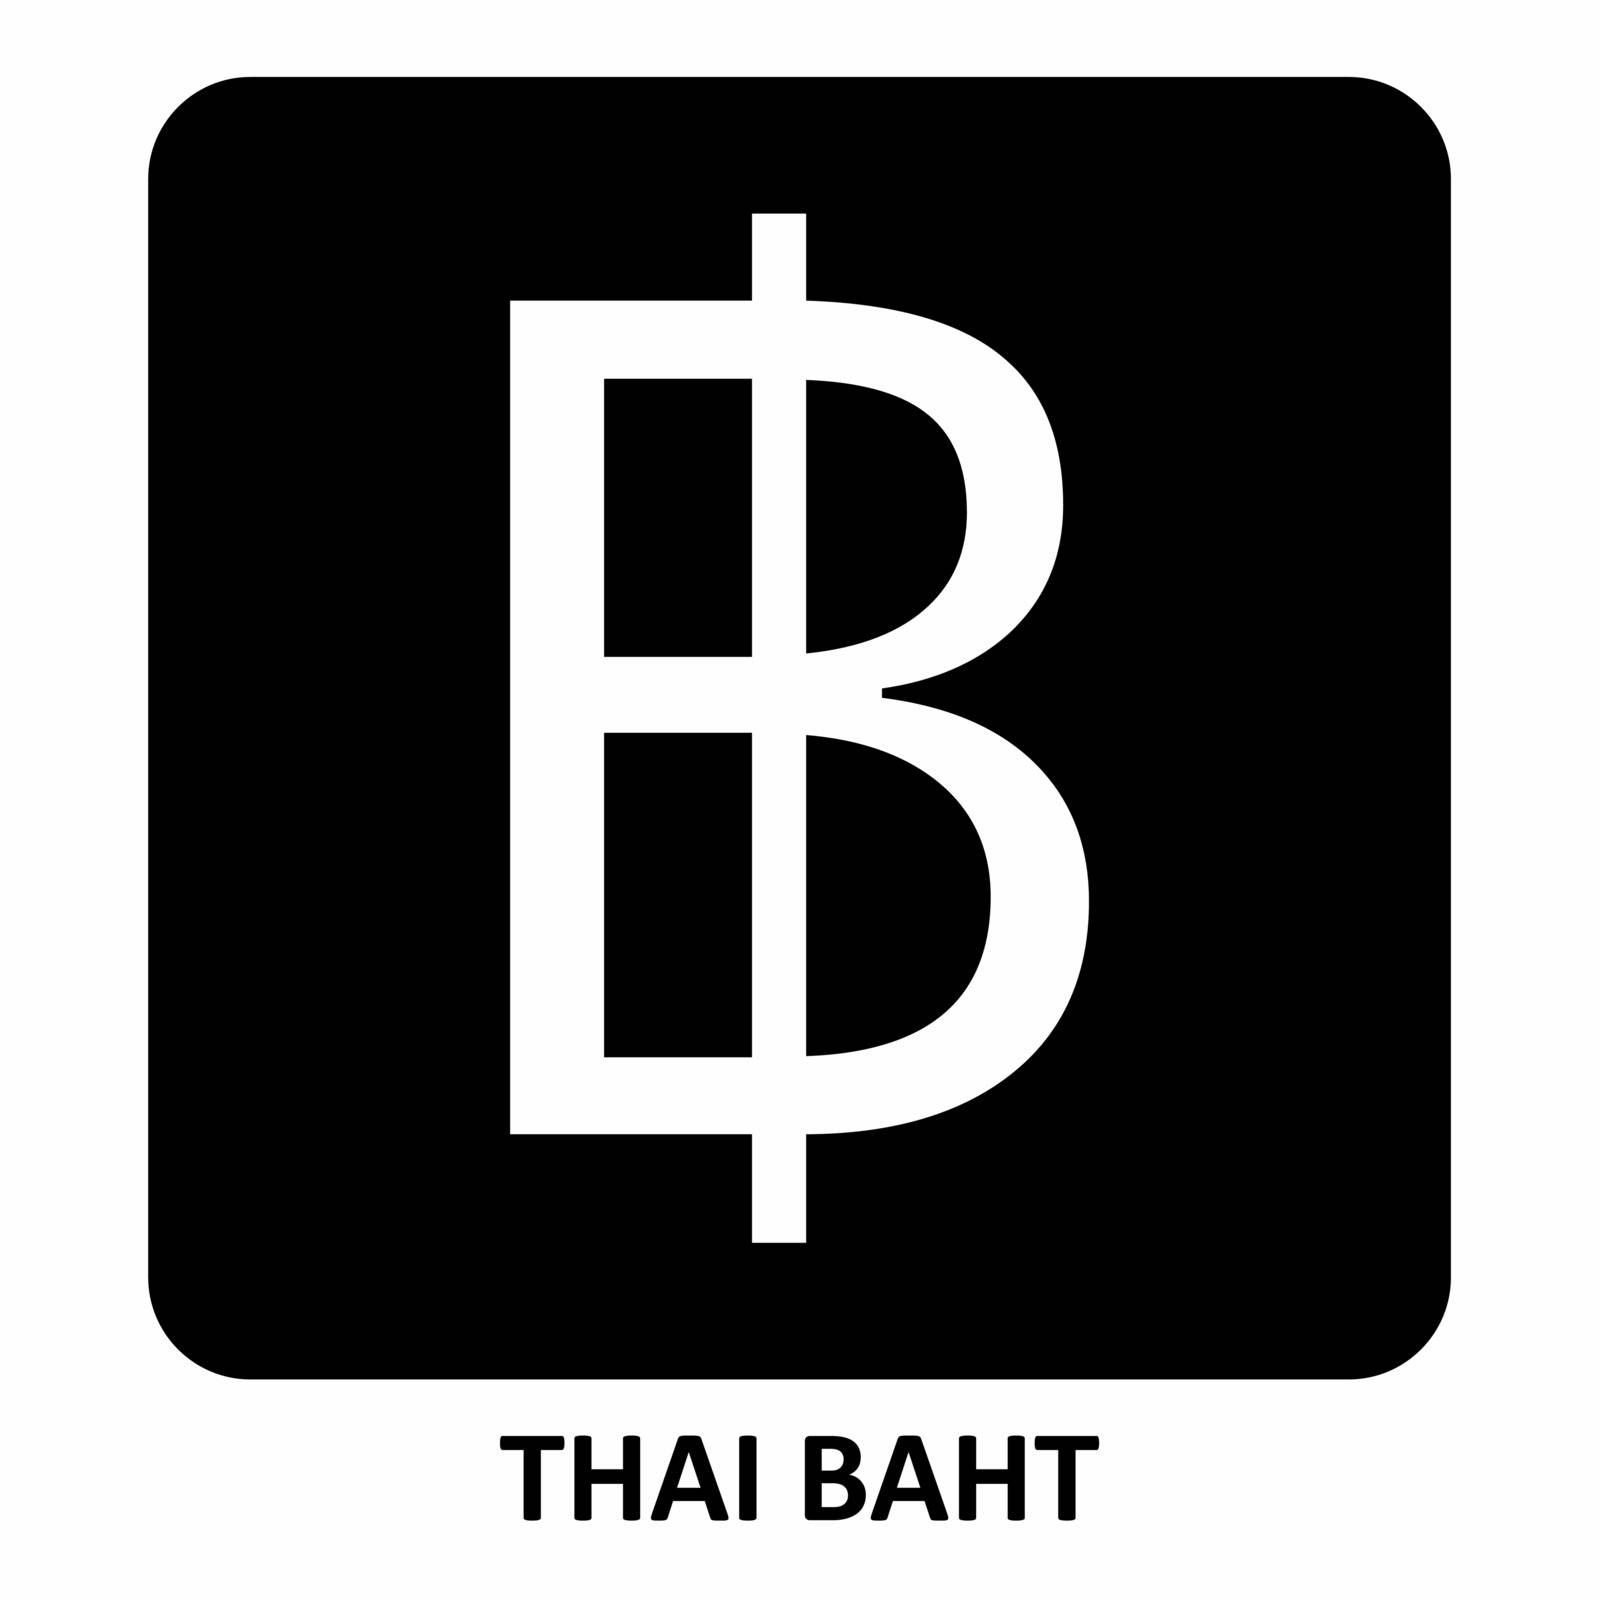 The illustration of the Thai Baht currency symbol